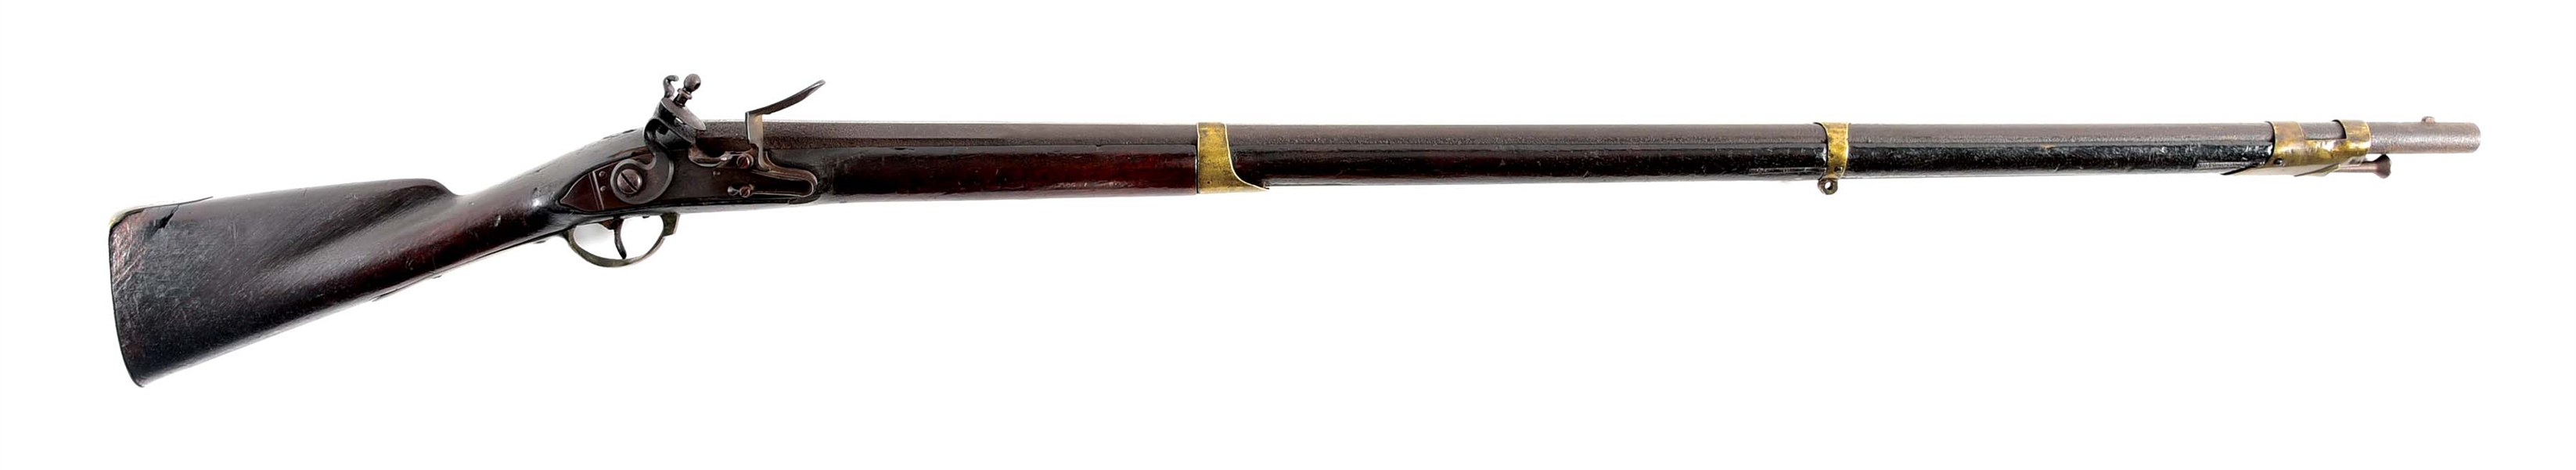 (A) ONLY KNOWN EXTANT FRENCH MODEL 1754 MARINE FLINTLOCK MUSKET.